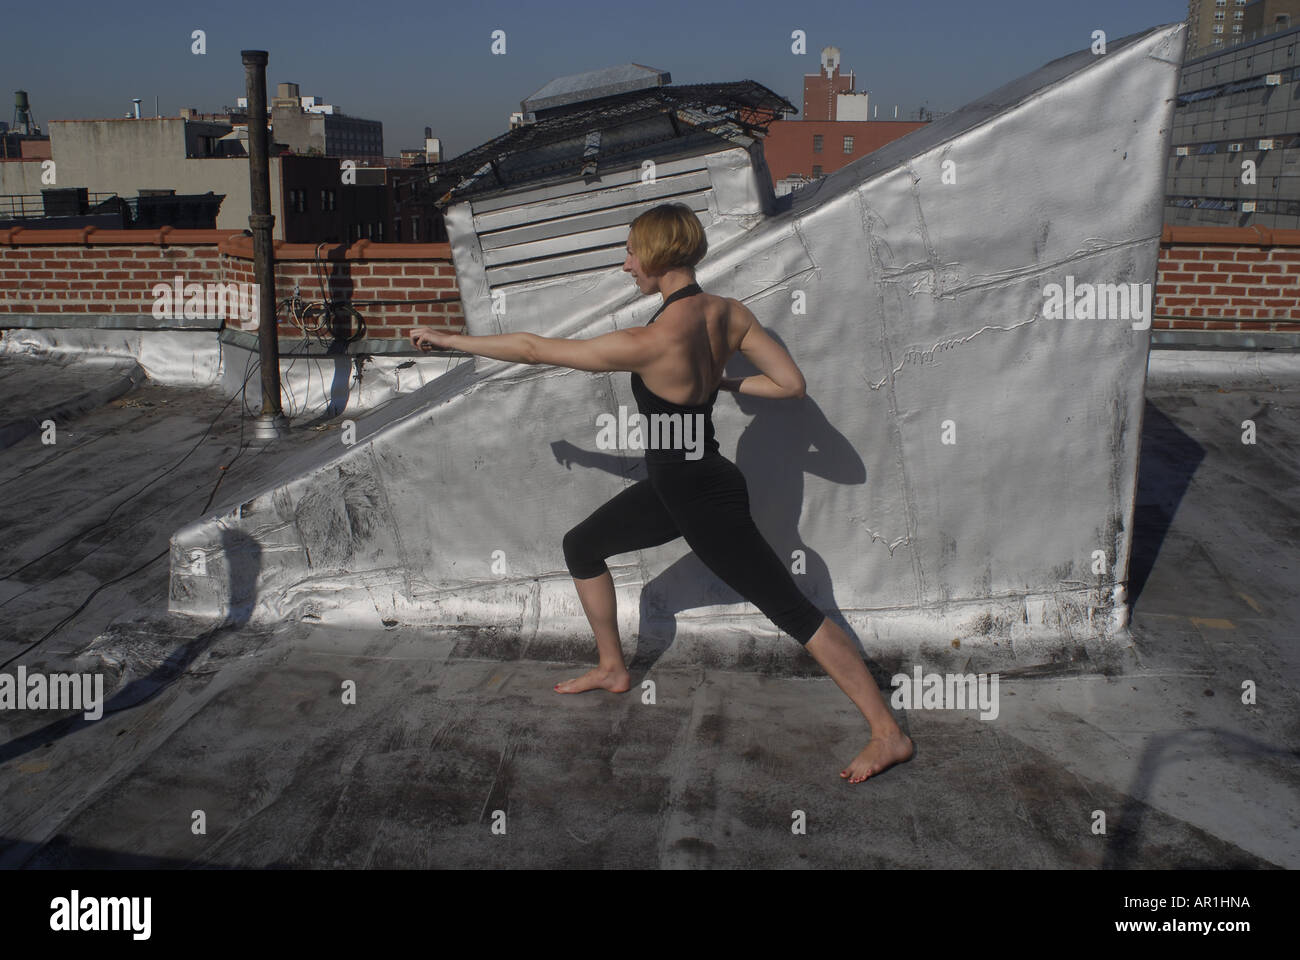 Model released New York CIty Thirty years old blond woman practising karate and martial arts in a sunny morning in mid town Manh Stock Photo